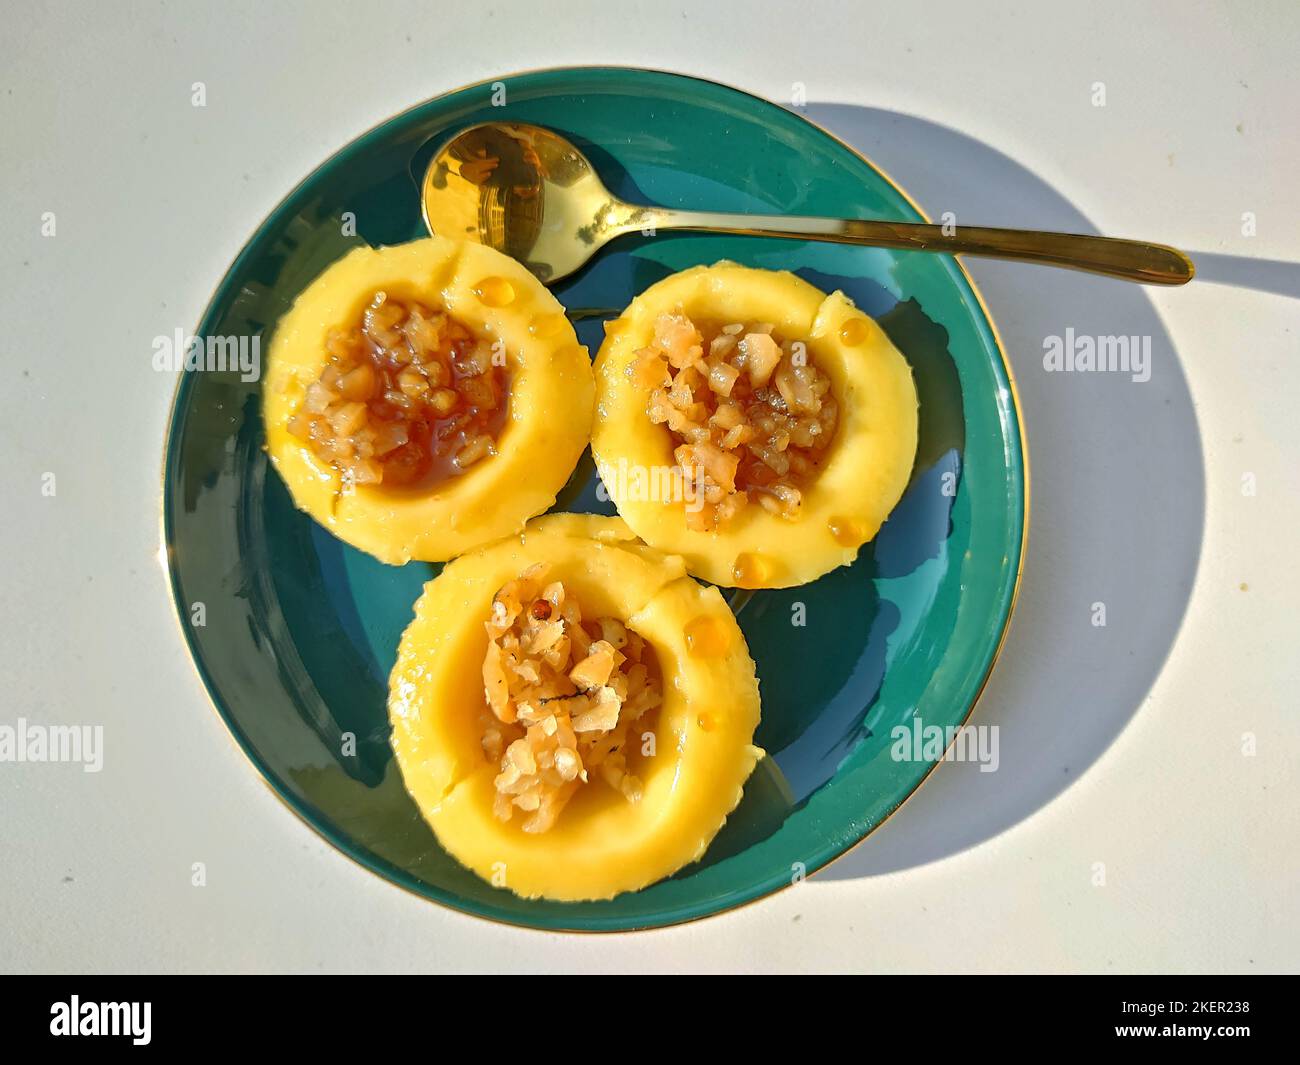 Chinese steamed rice cake with hot preserved radish relish and palm sugar in Thailand Stock Photo